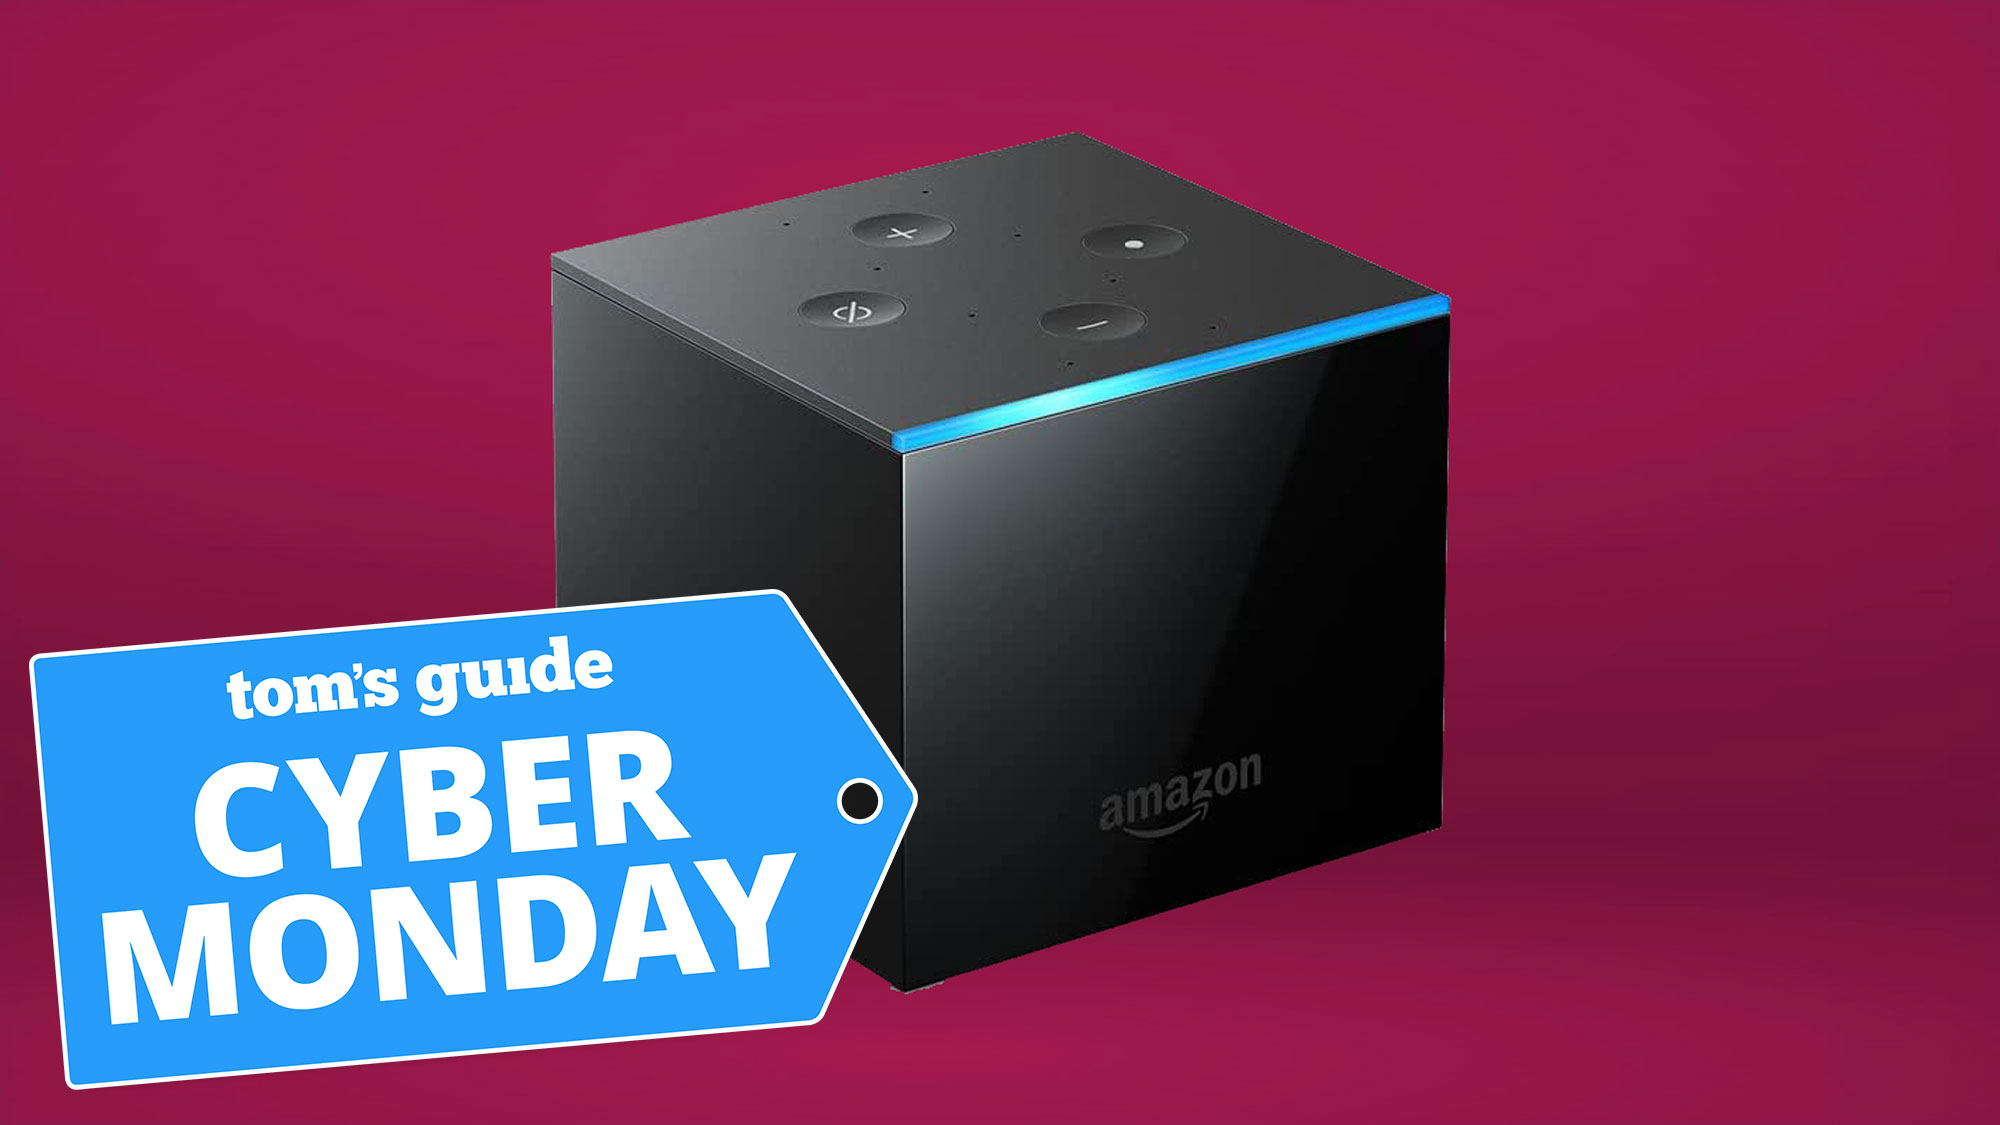 Amazon Fire TV Cube product shot with Cyber Monday badge